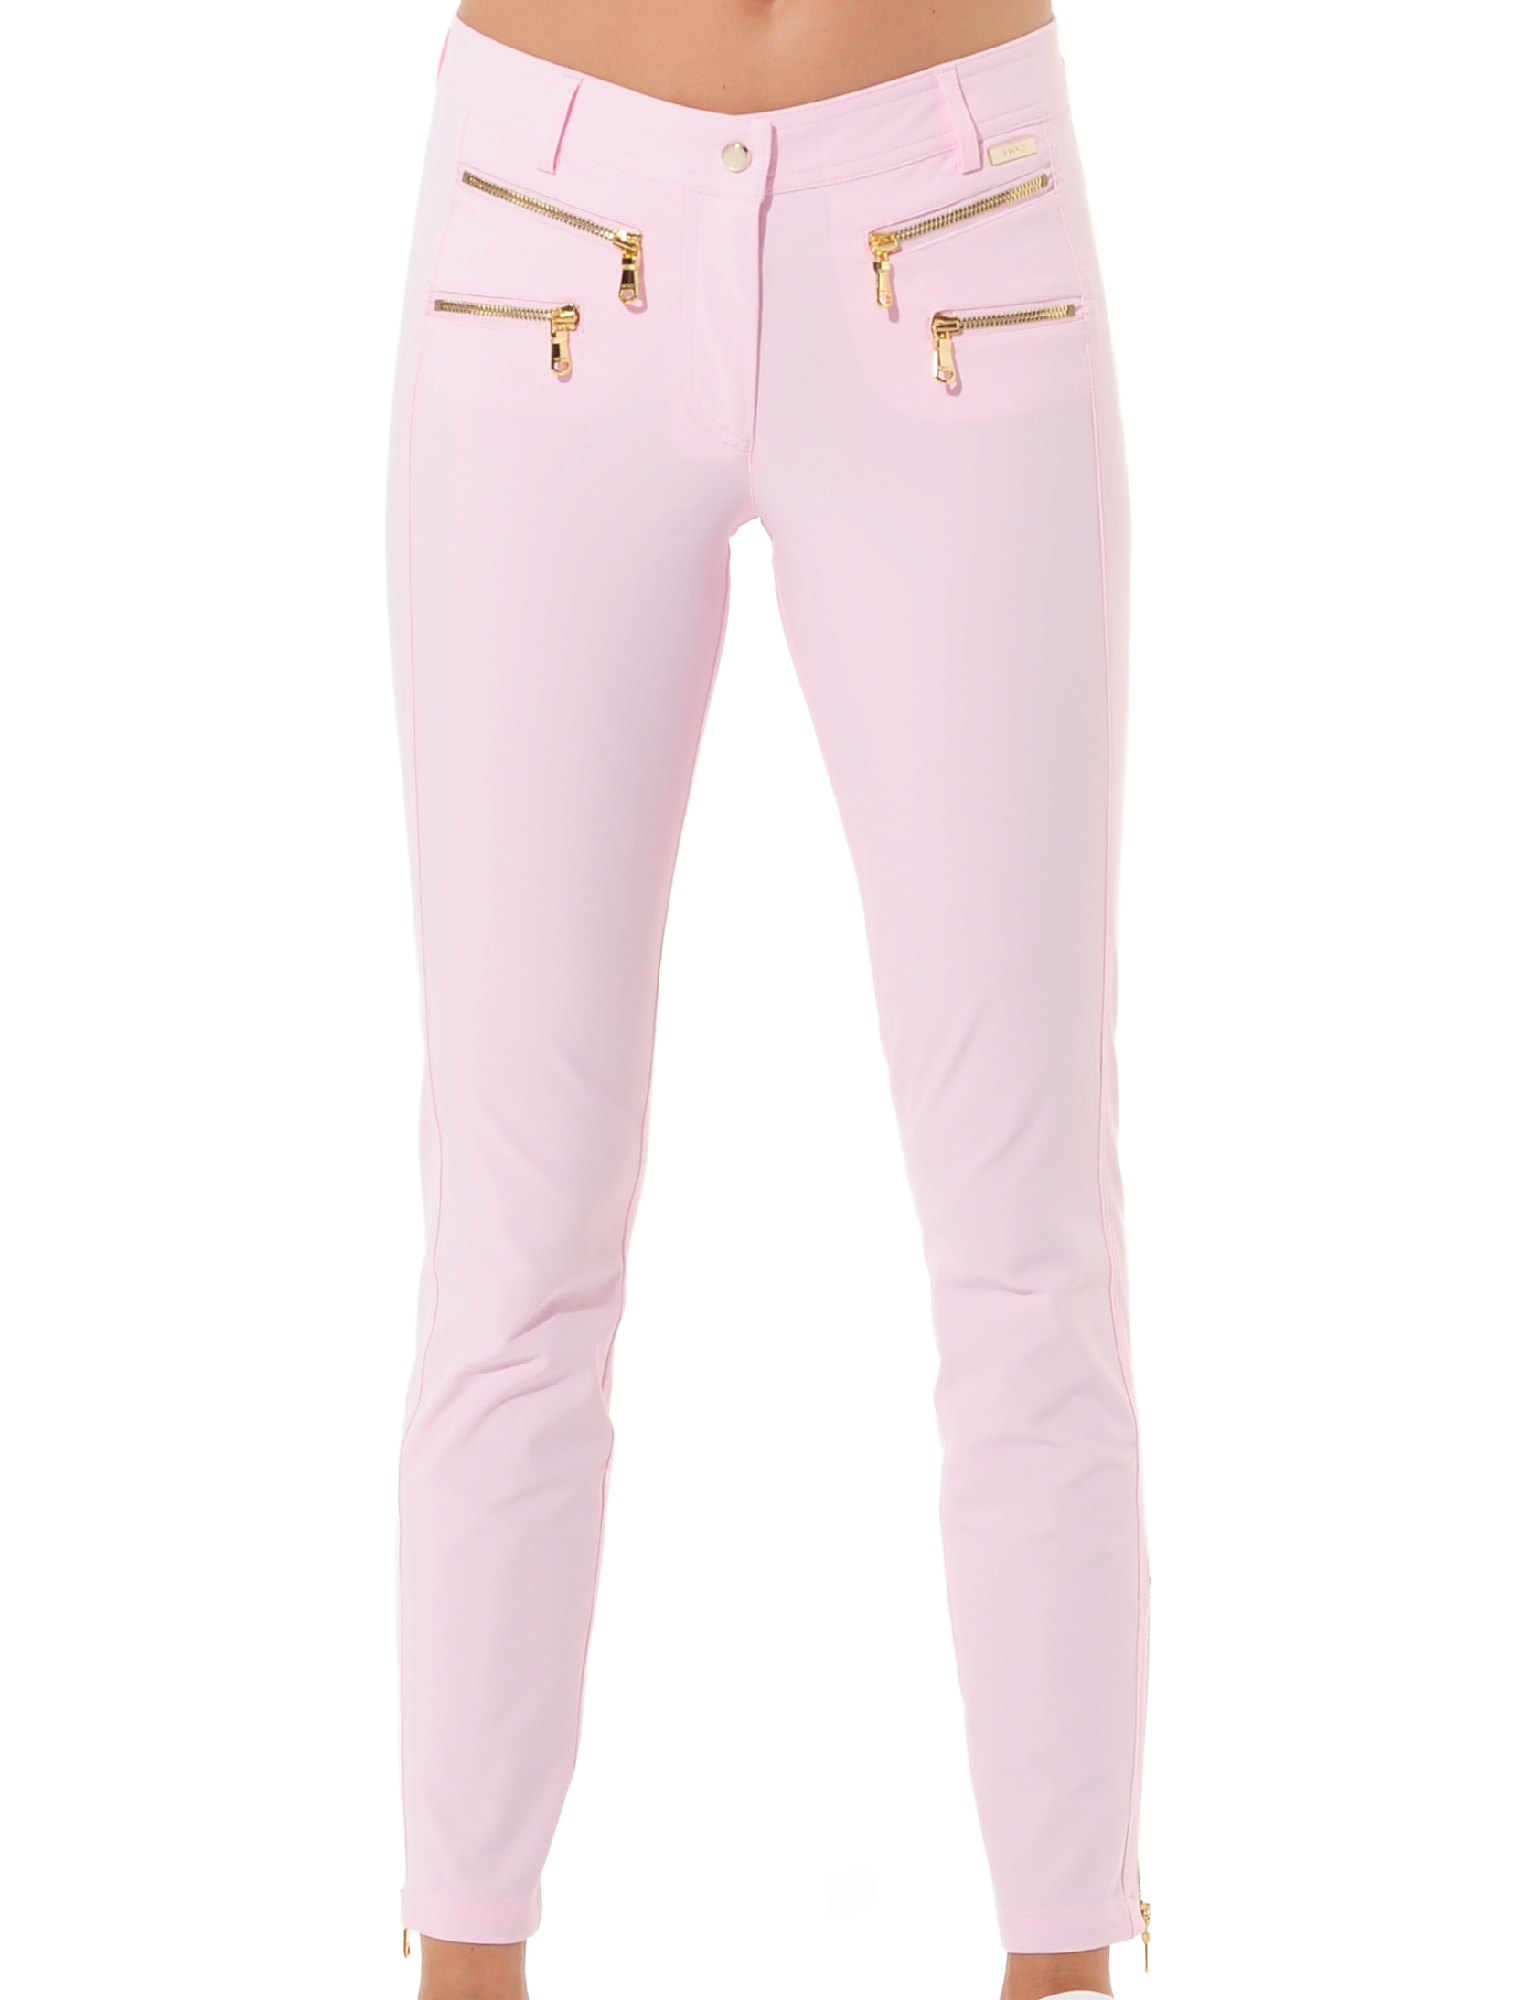 4way stretch shiny gold double zip ankle pants macaron 